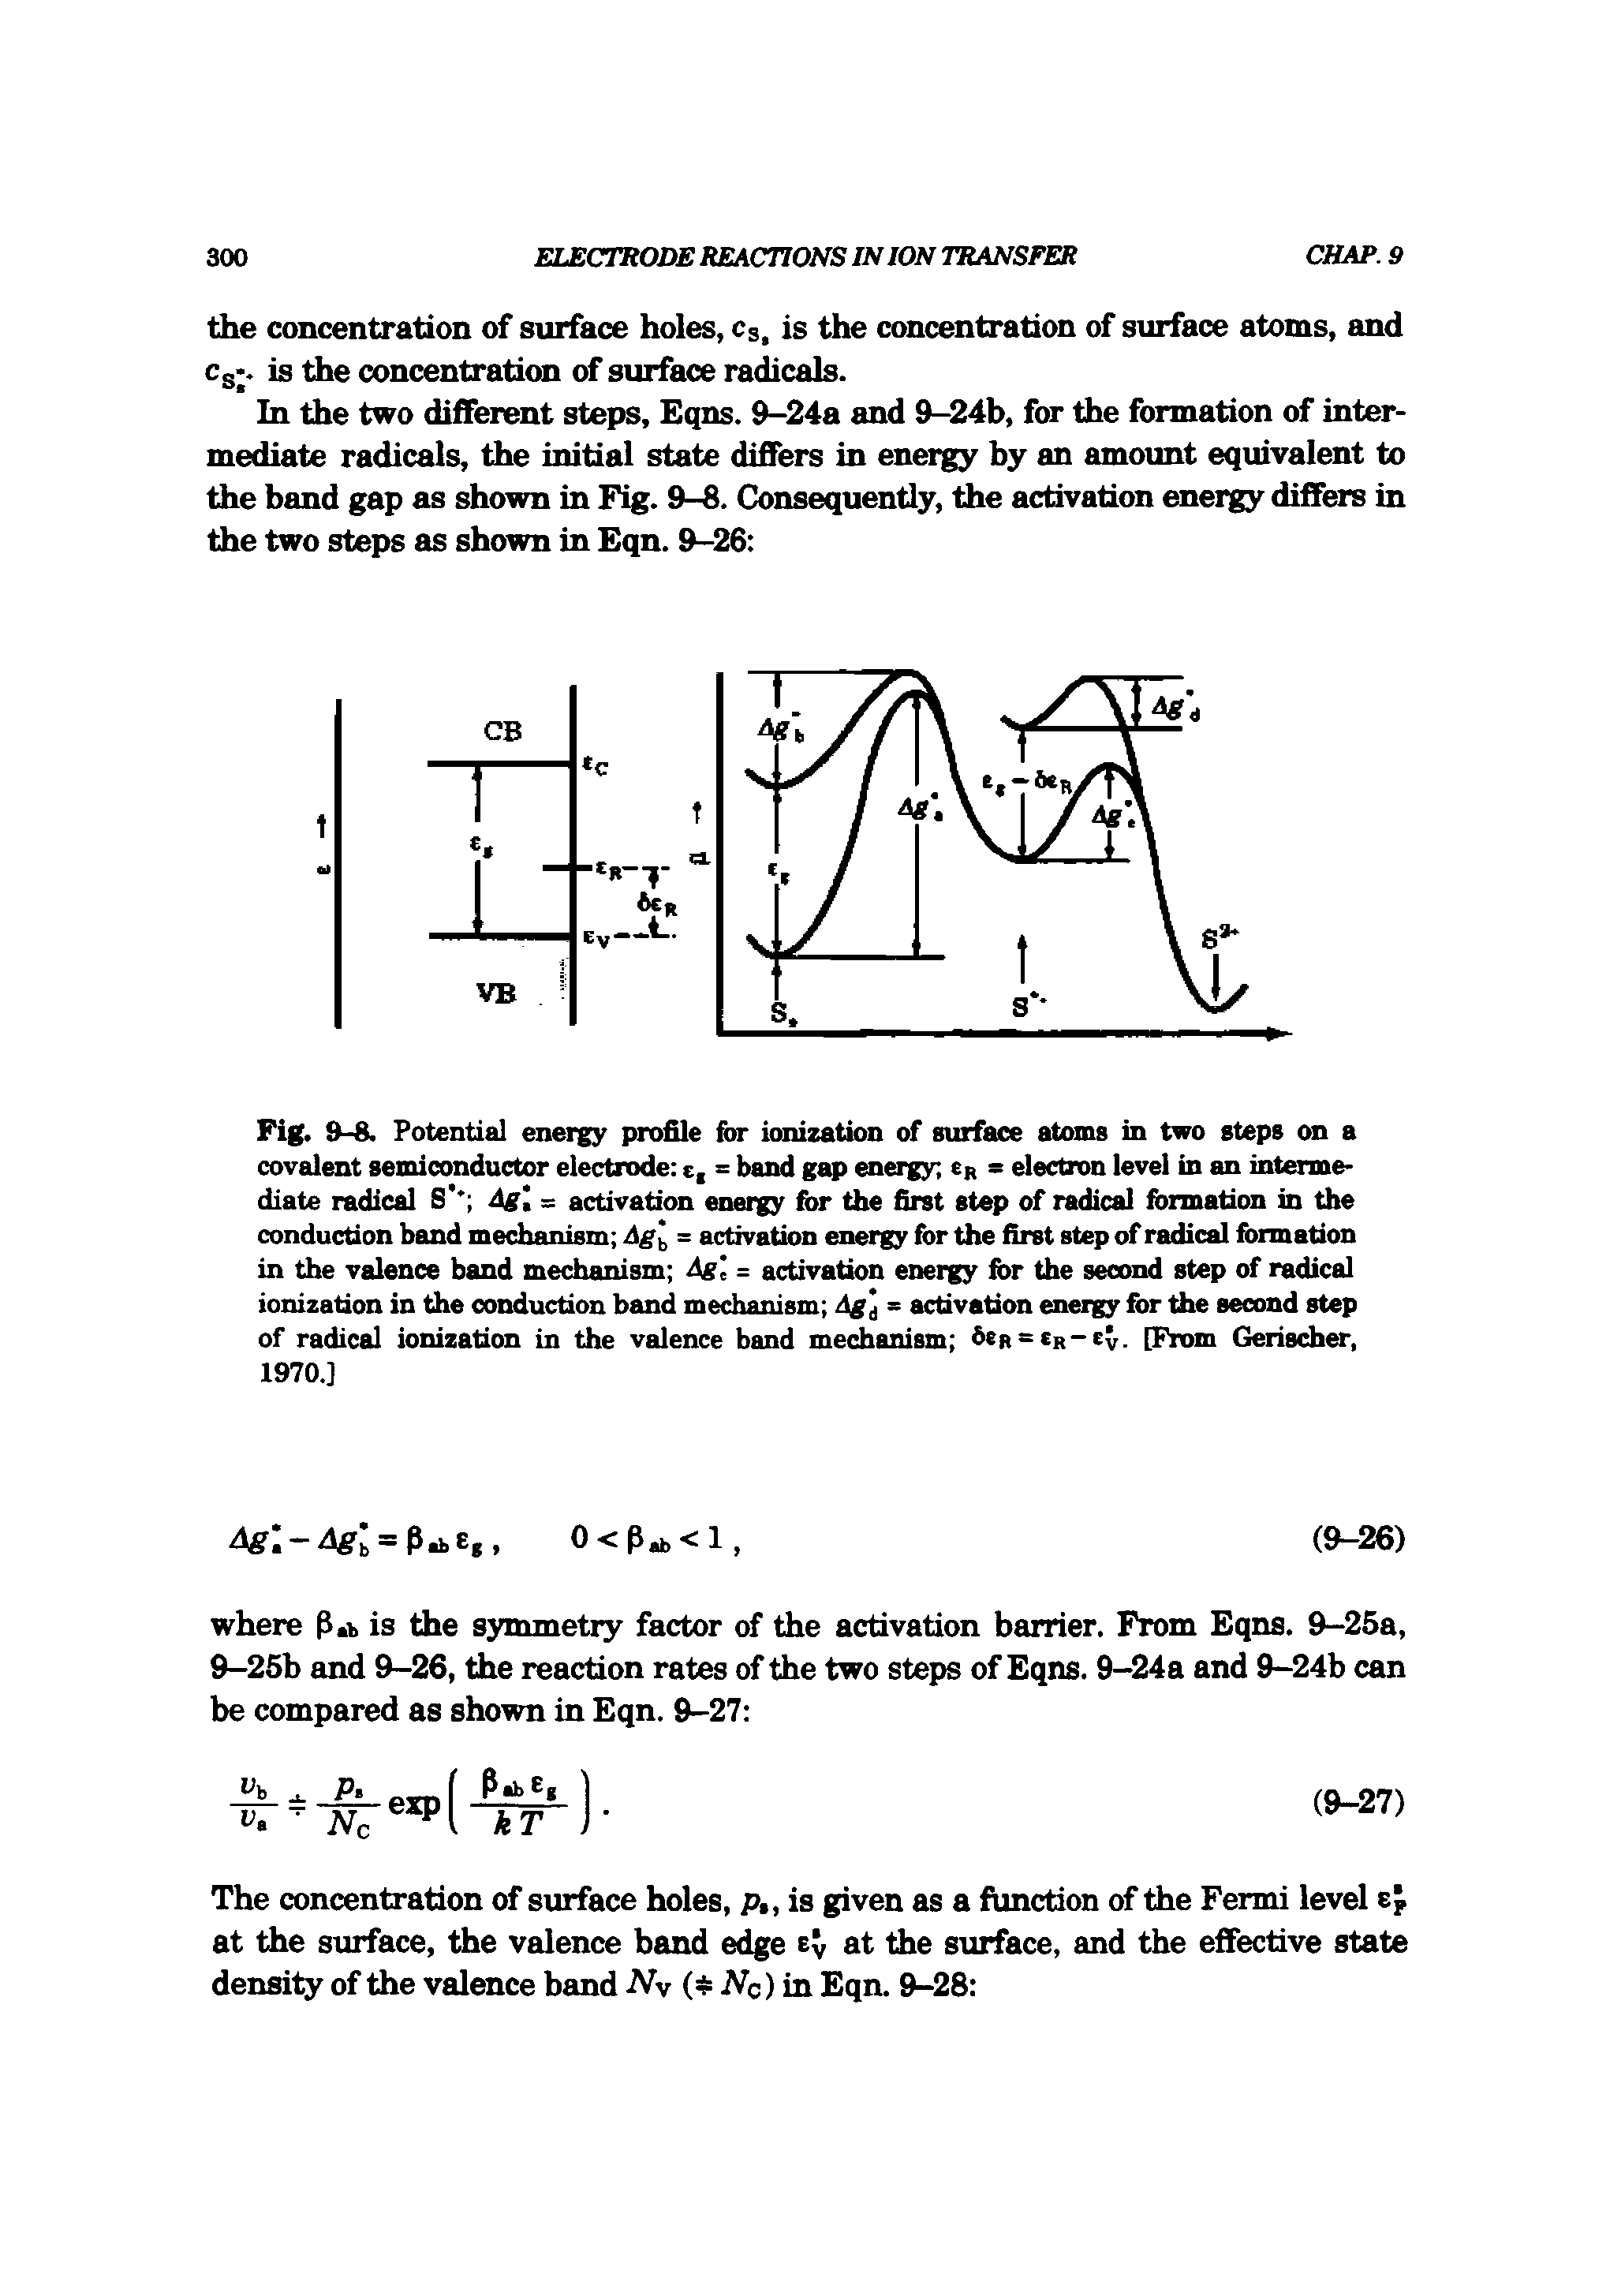 Fig. 9-8. Potential energy profile for ionization of surface atoms in two steps on a covalent semiconductor electrode c, = band giq> energy tfi s electron level in an intermediate radical S " Ag = activation energy for the first step of radical formation in the conduction band mechanism df = activation energy for the first step of radical formation in the valence band mechanism = activation energy for the second step of radical ionization in the conduction band mechanism Ag = activation energy for the second step of radical ionization in the valence band mechanism beR = CR-Ev. [From Gerischer, 1970.]...